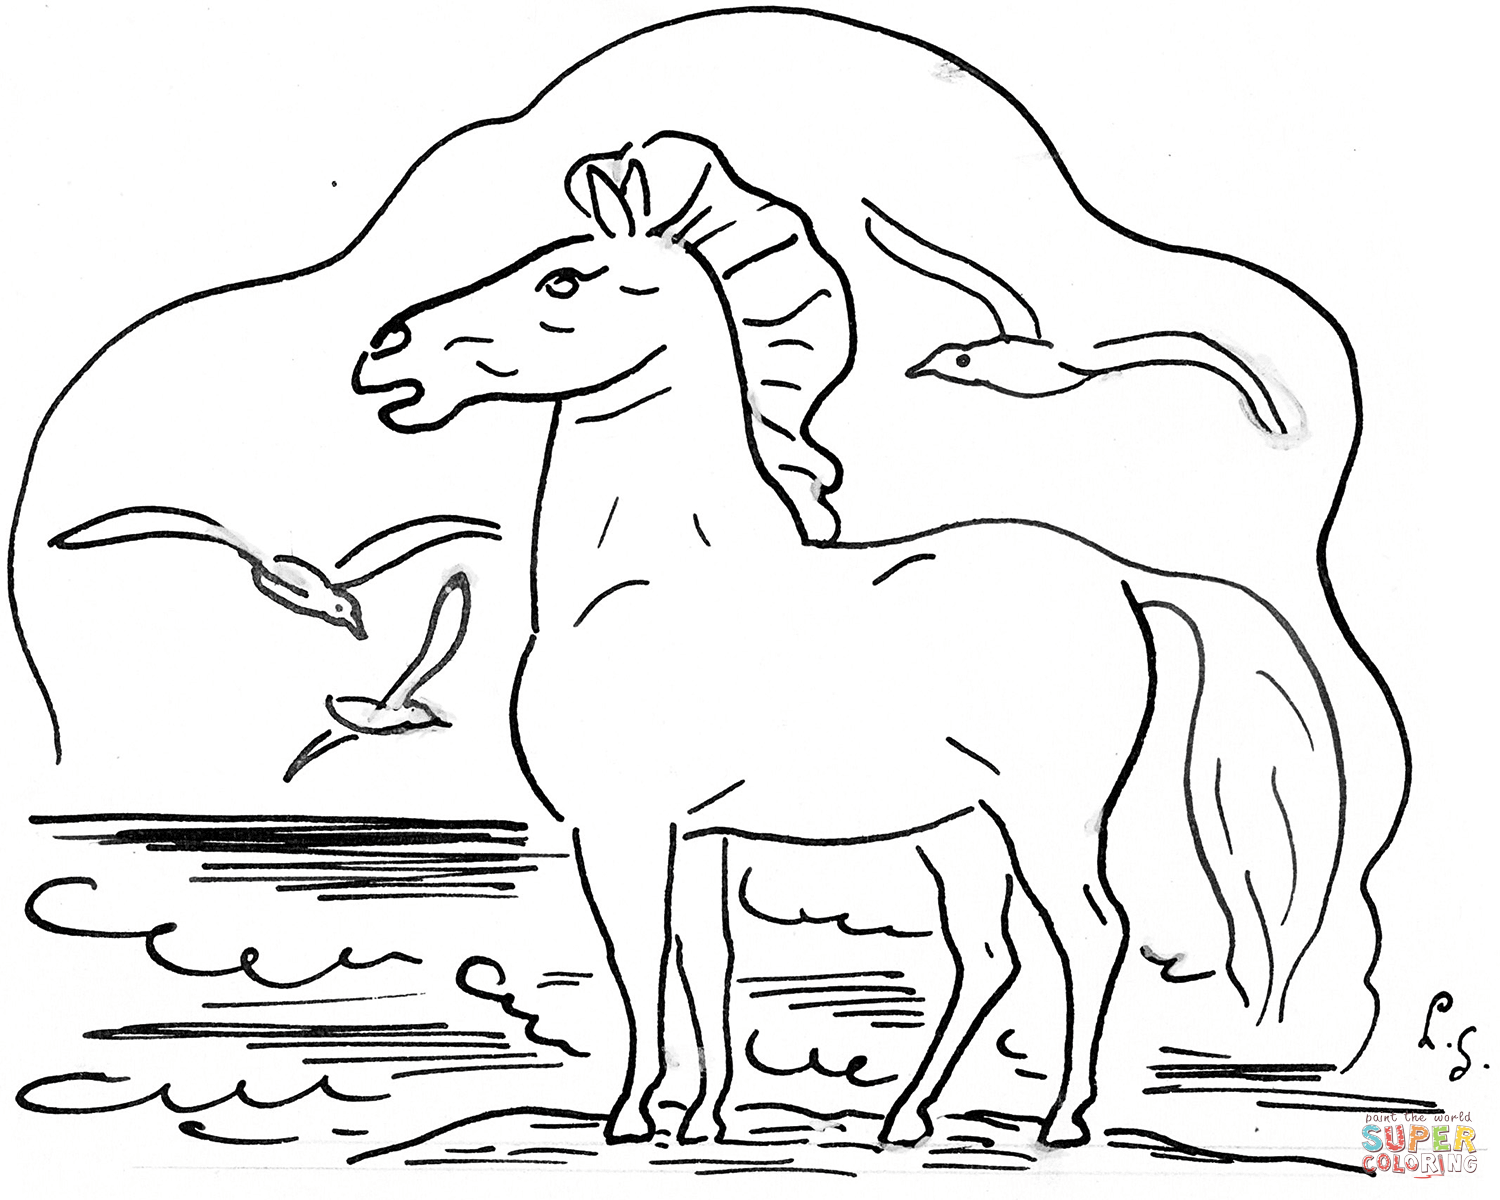 Horse by the sea with seagulls coloring page free printable coloring pages